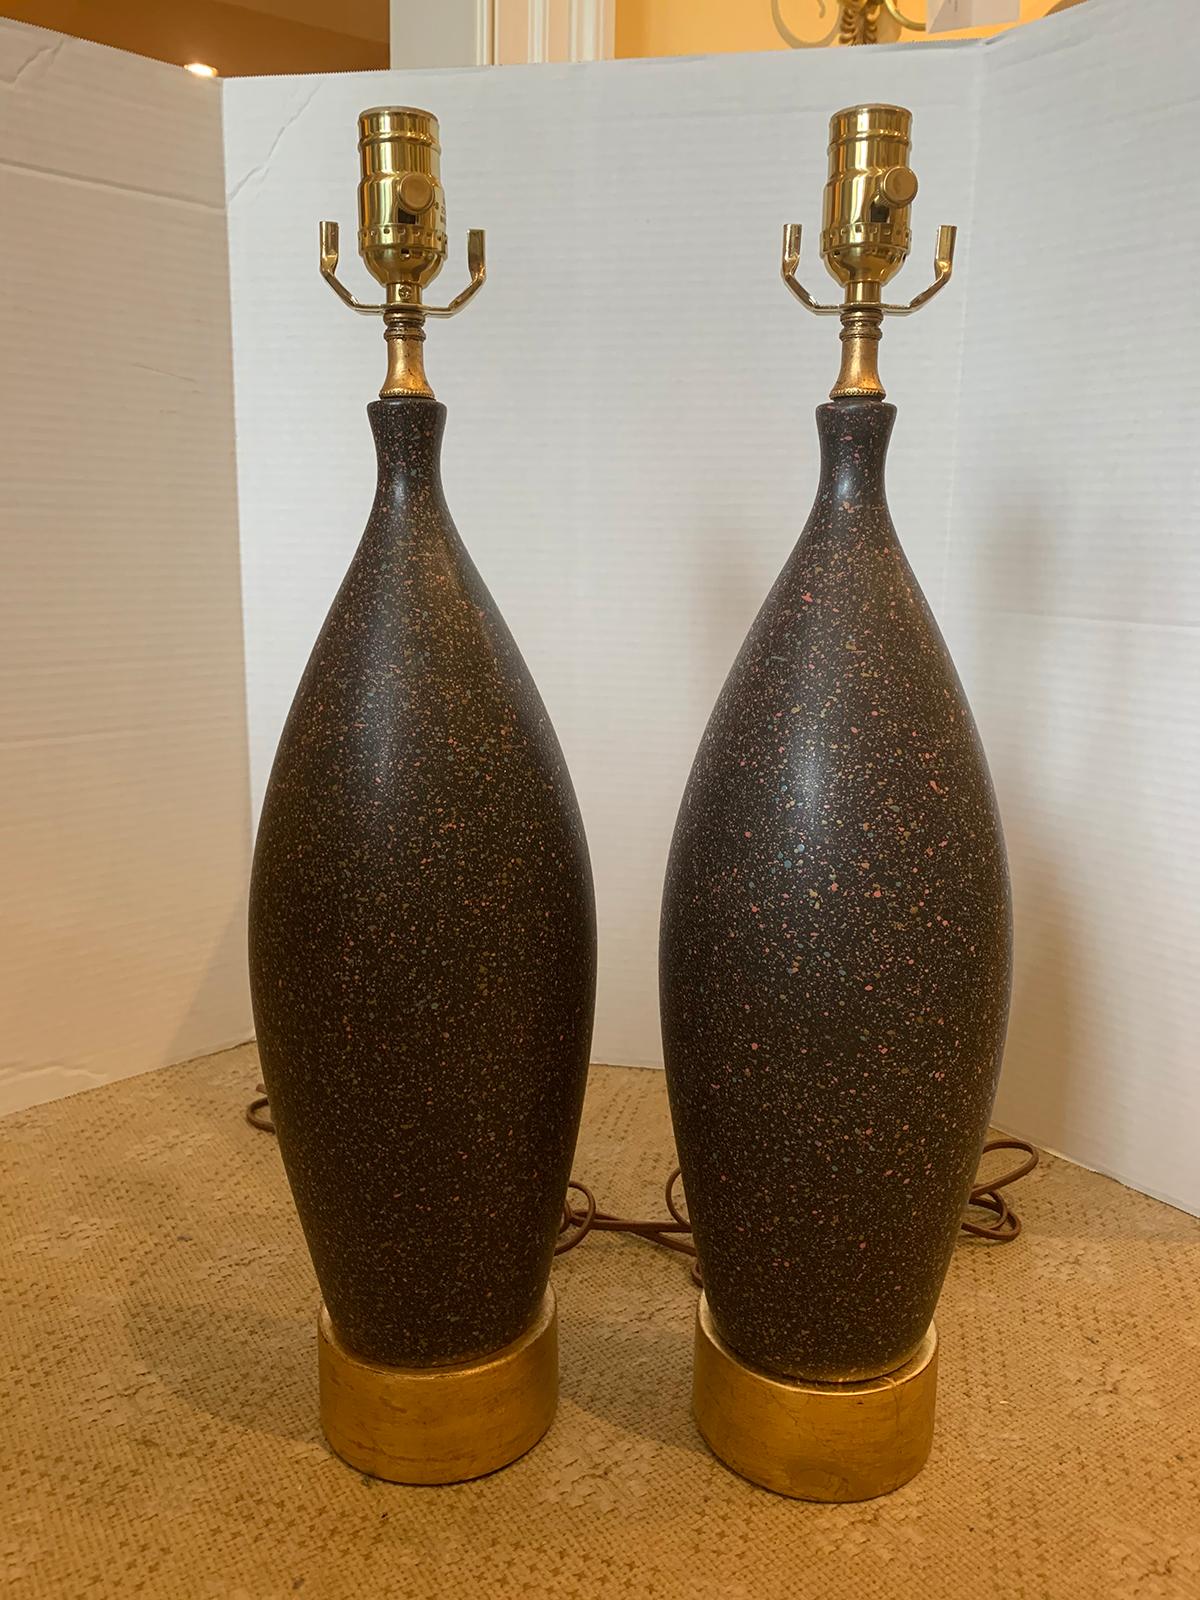 Pair of mid-20th century black pottery lamps on custom gilt bases
New wiring.